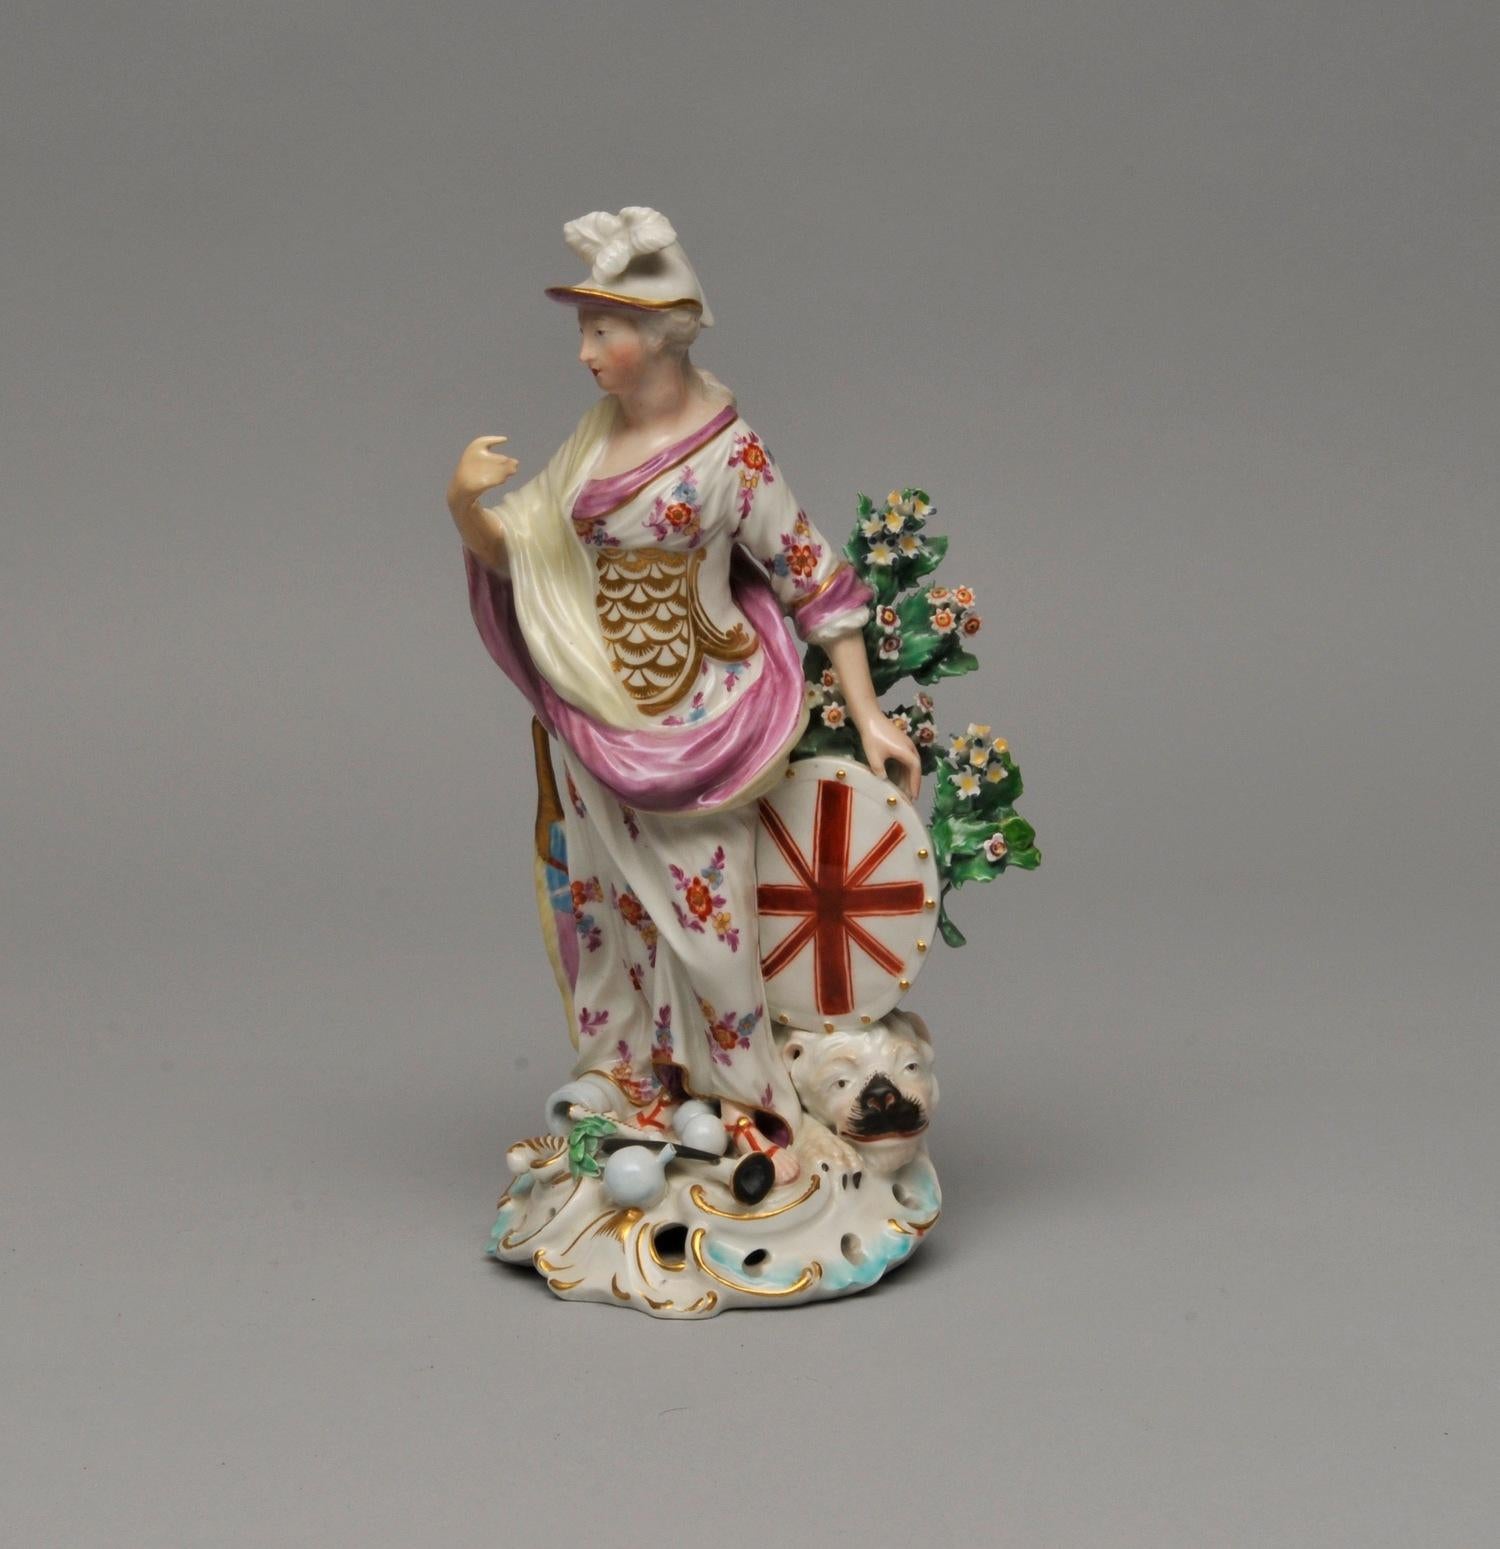 'Britannia'

Measures: 26 cm height

A beautiful example of Derby porcelain.